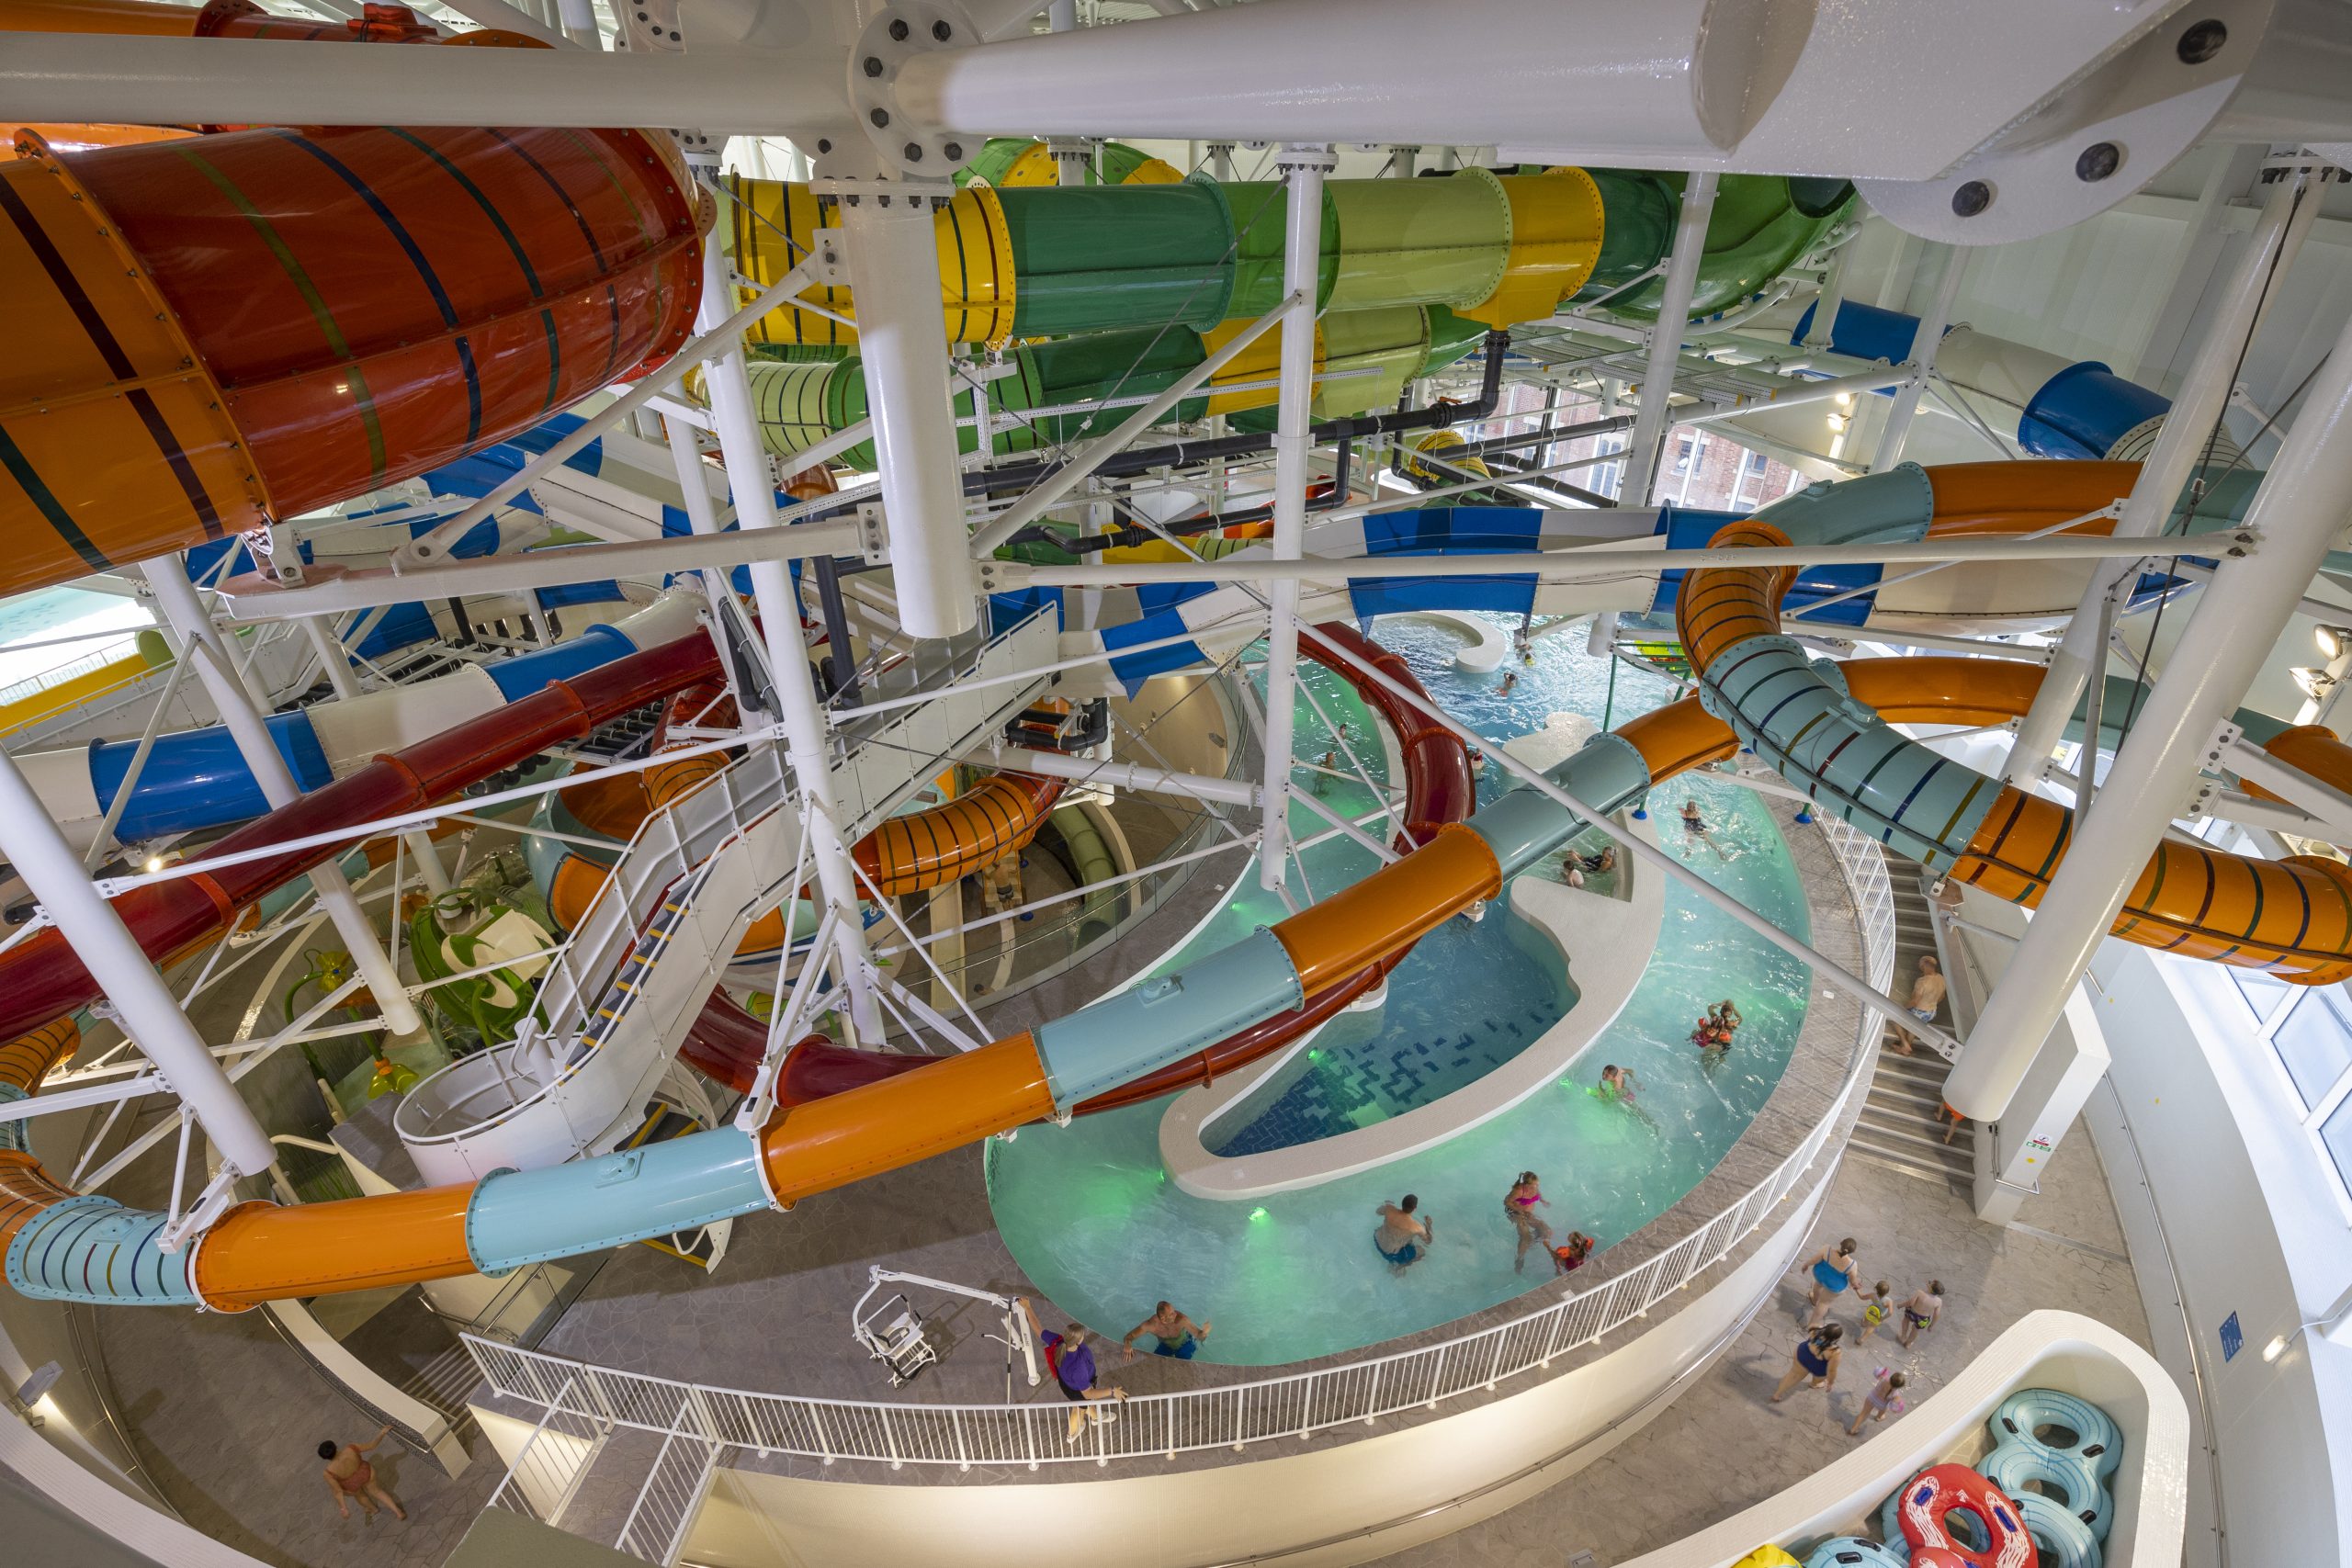 Credit photographer Martine Hamilton Knight for this The Wave Waterpark, Coventry image